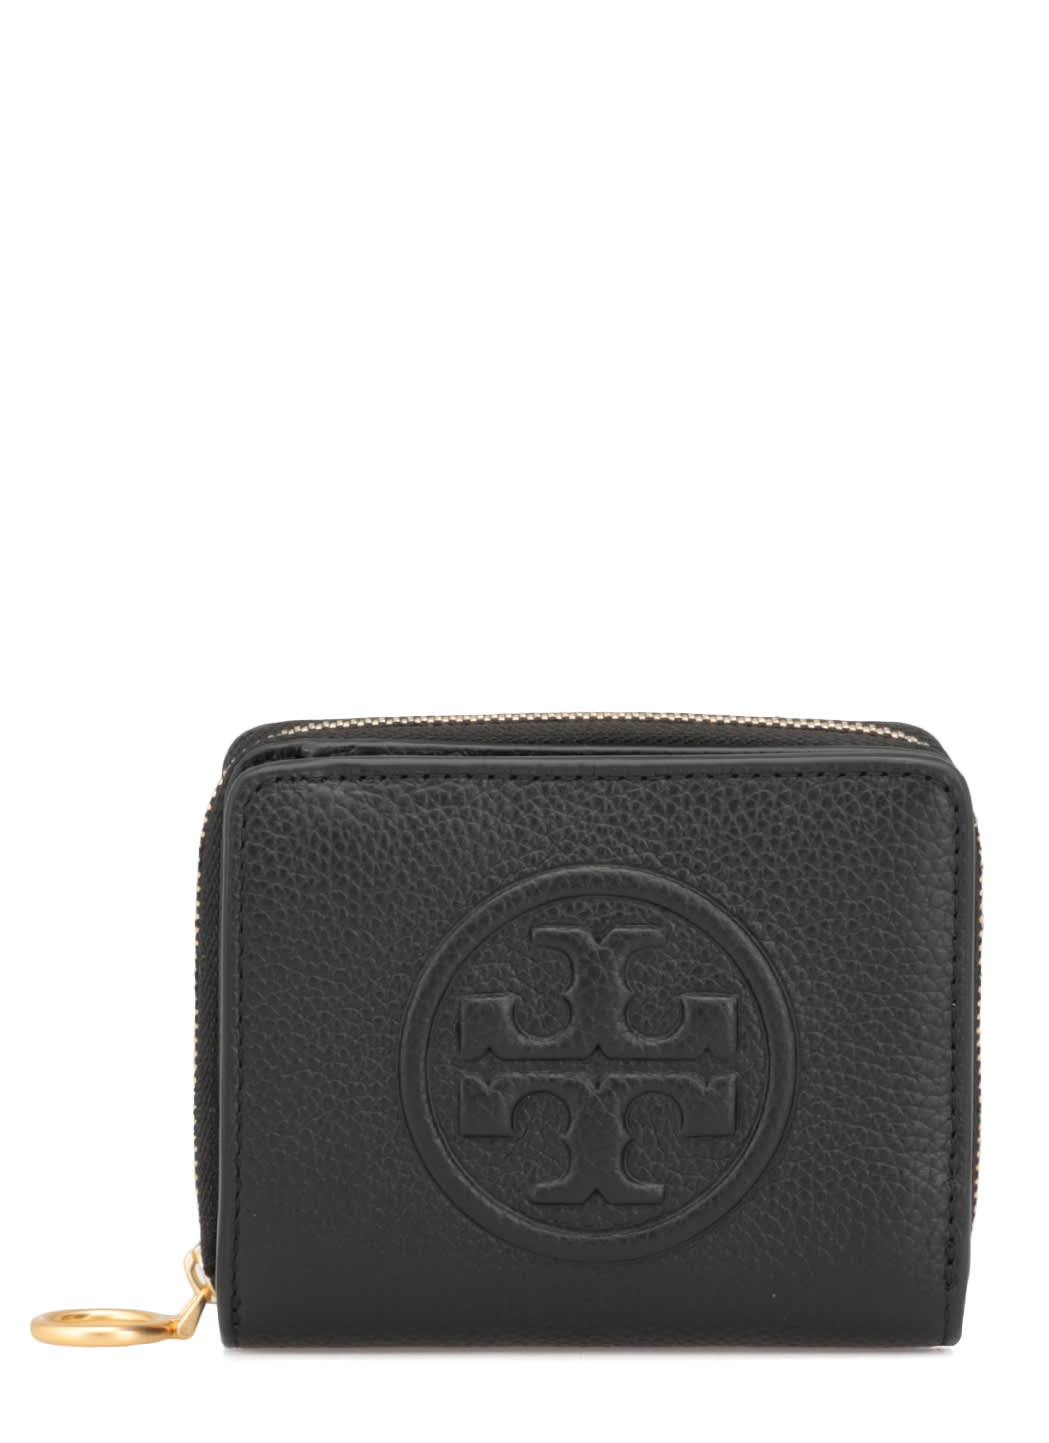 Tory Burch Plebbed Leather Wallet